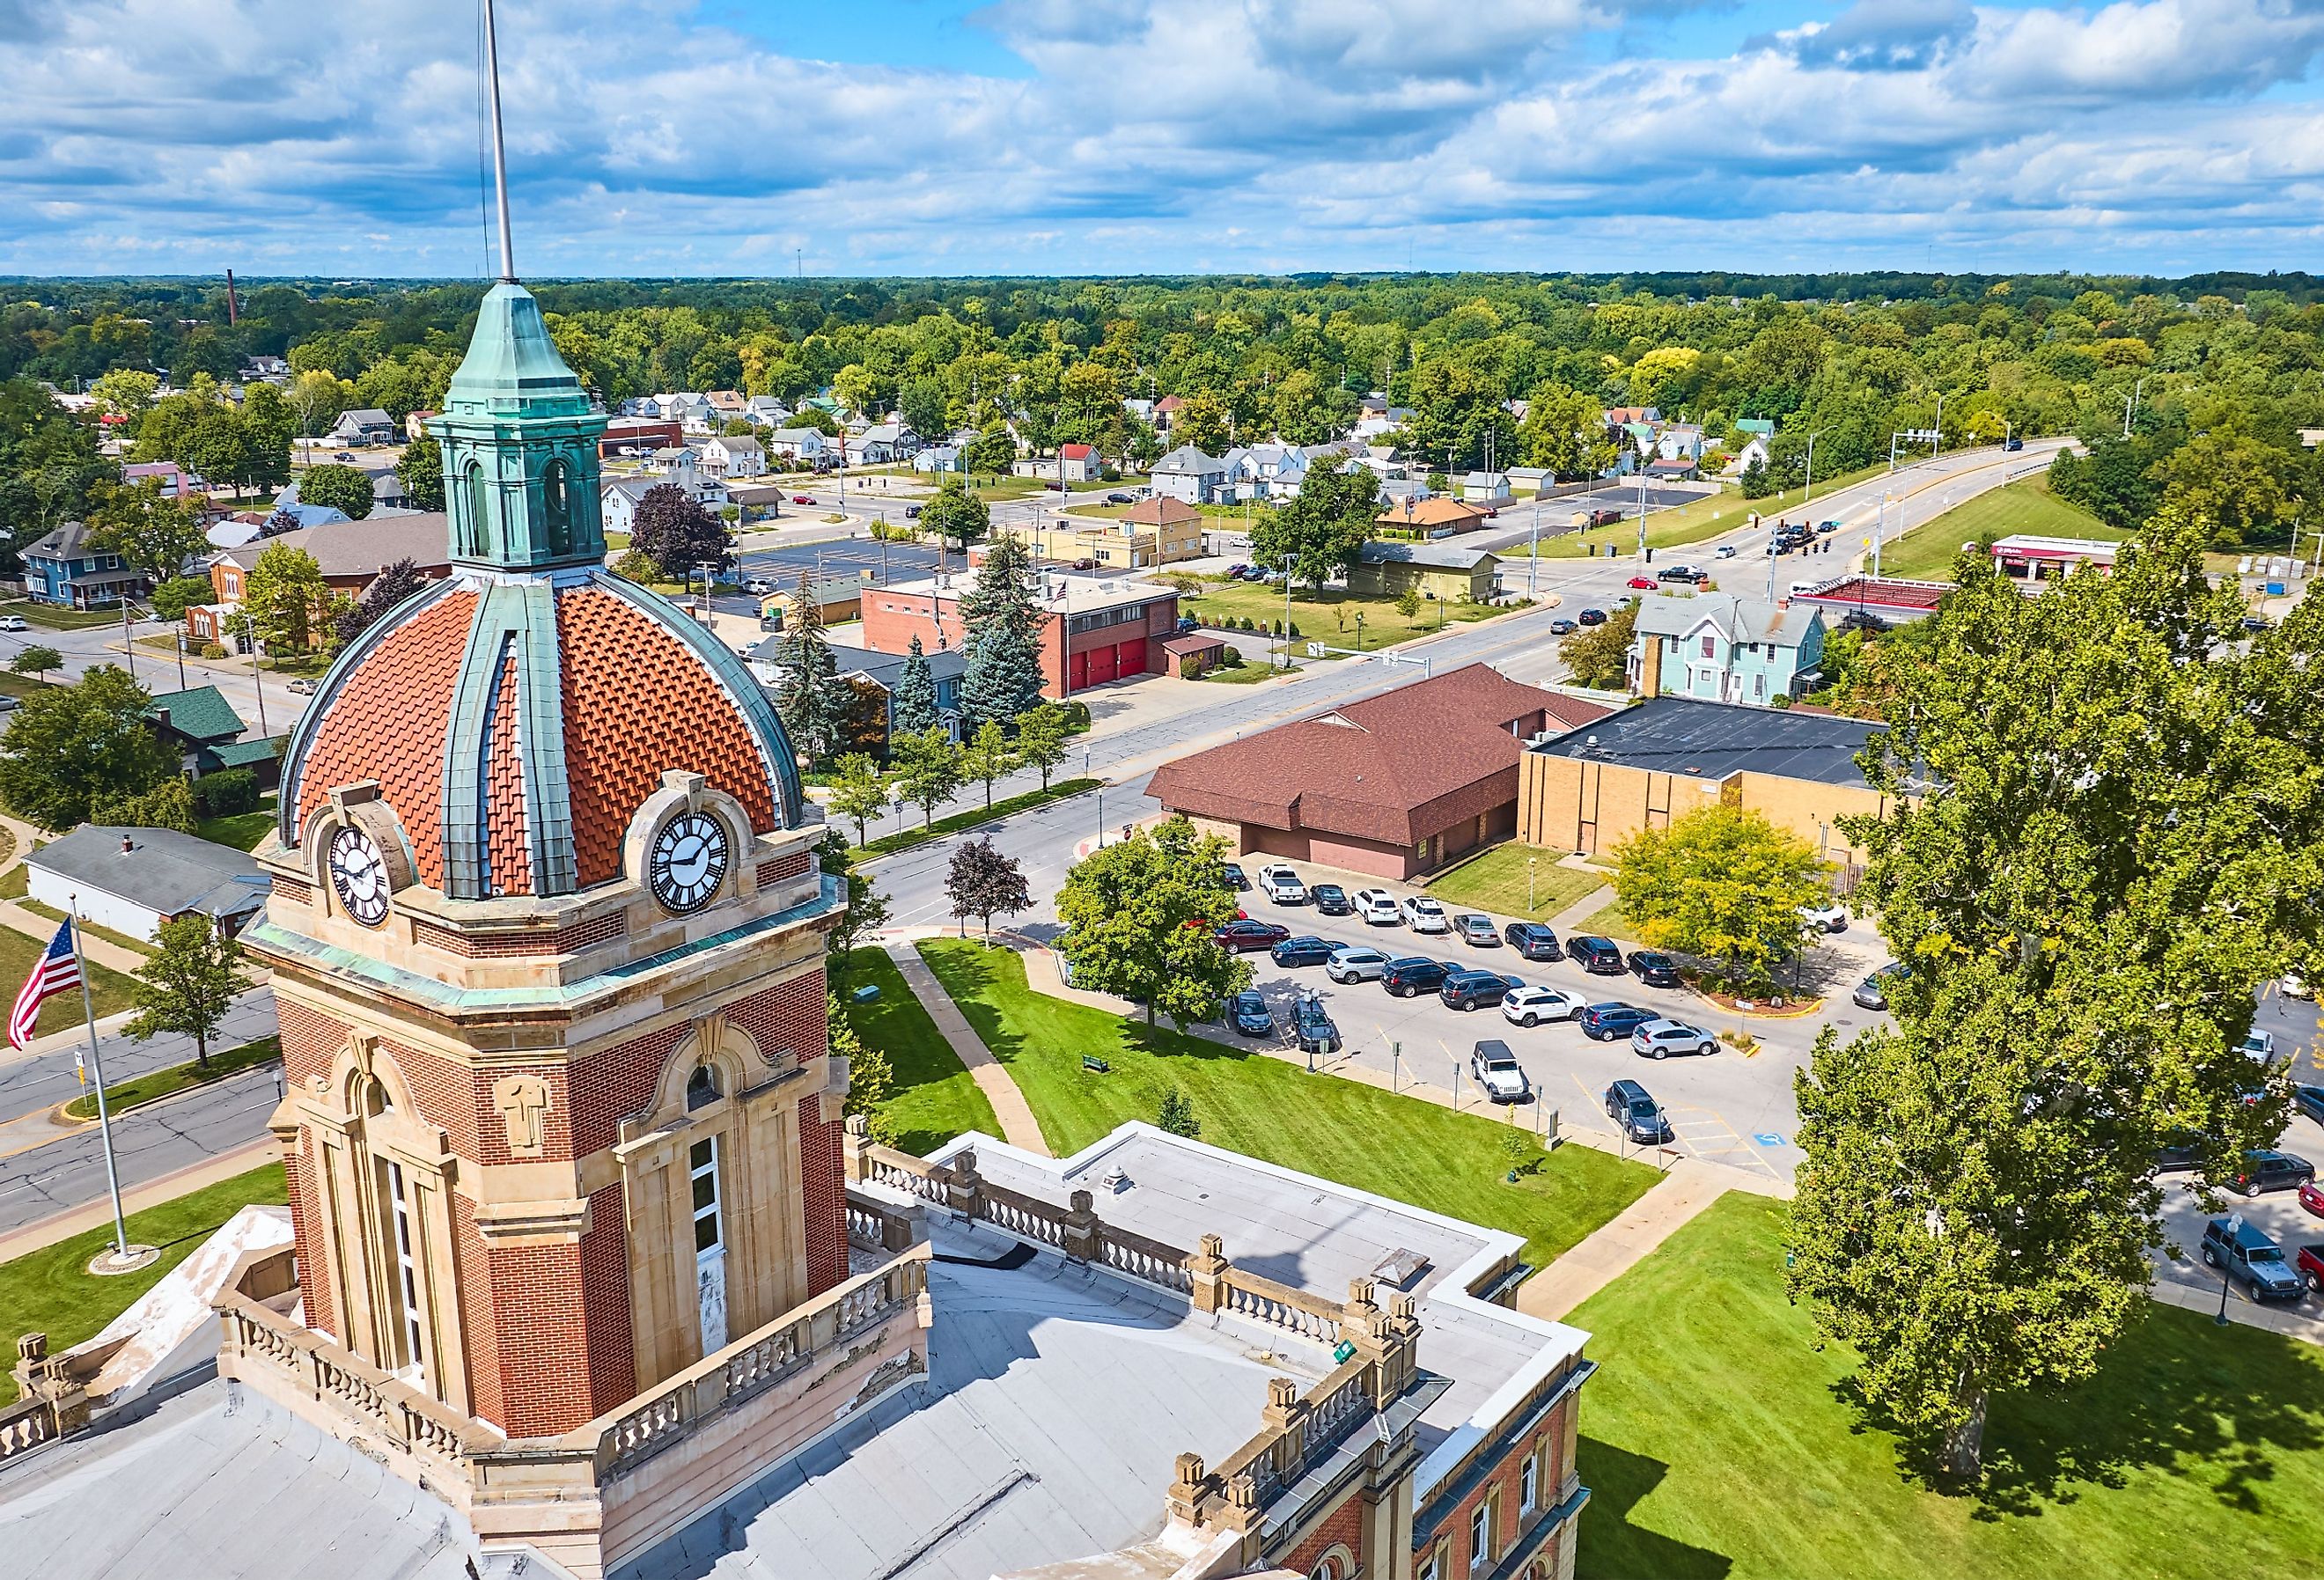 Aerial view of Elkhart Courthouse and suburban townscape of Goshen, Indiana.